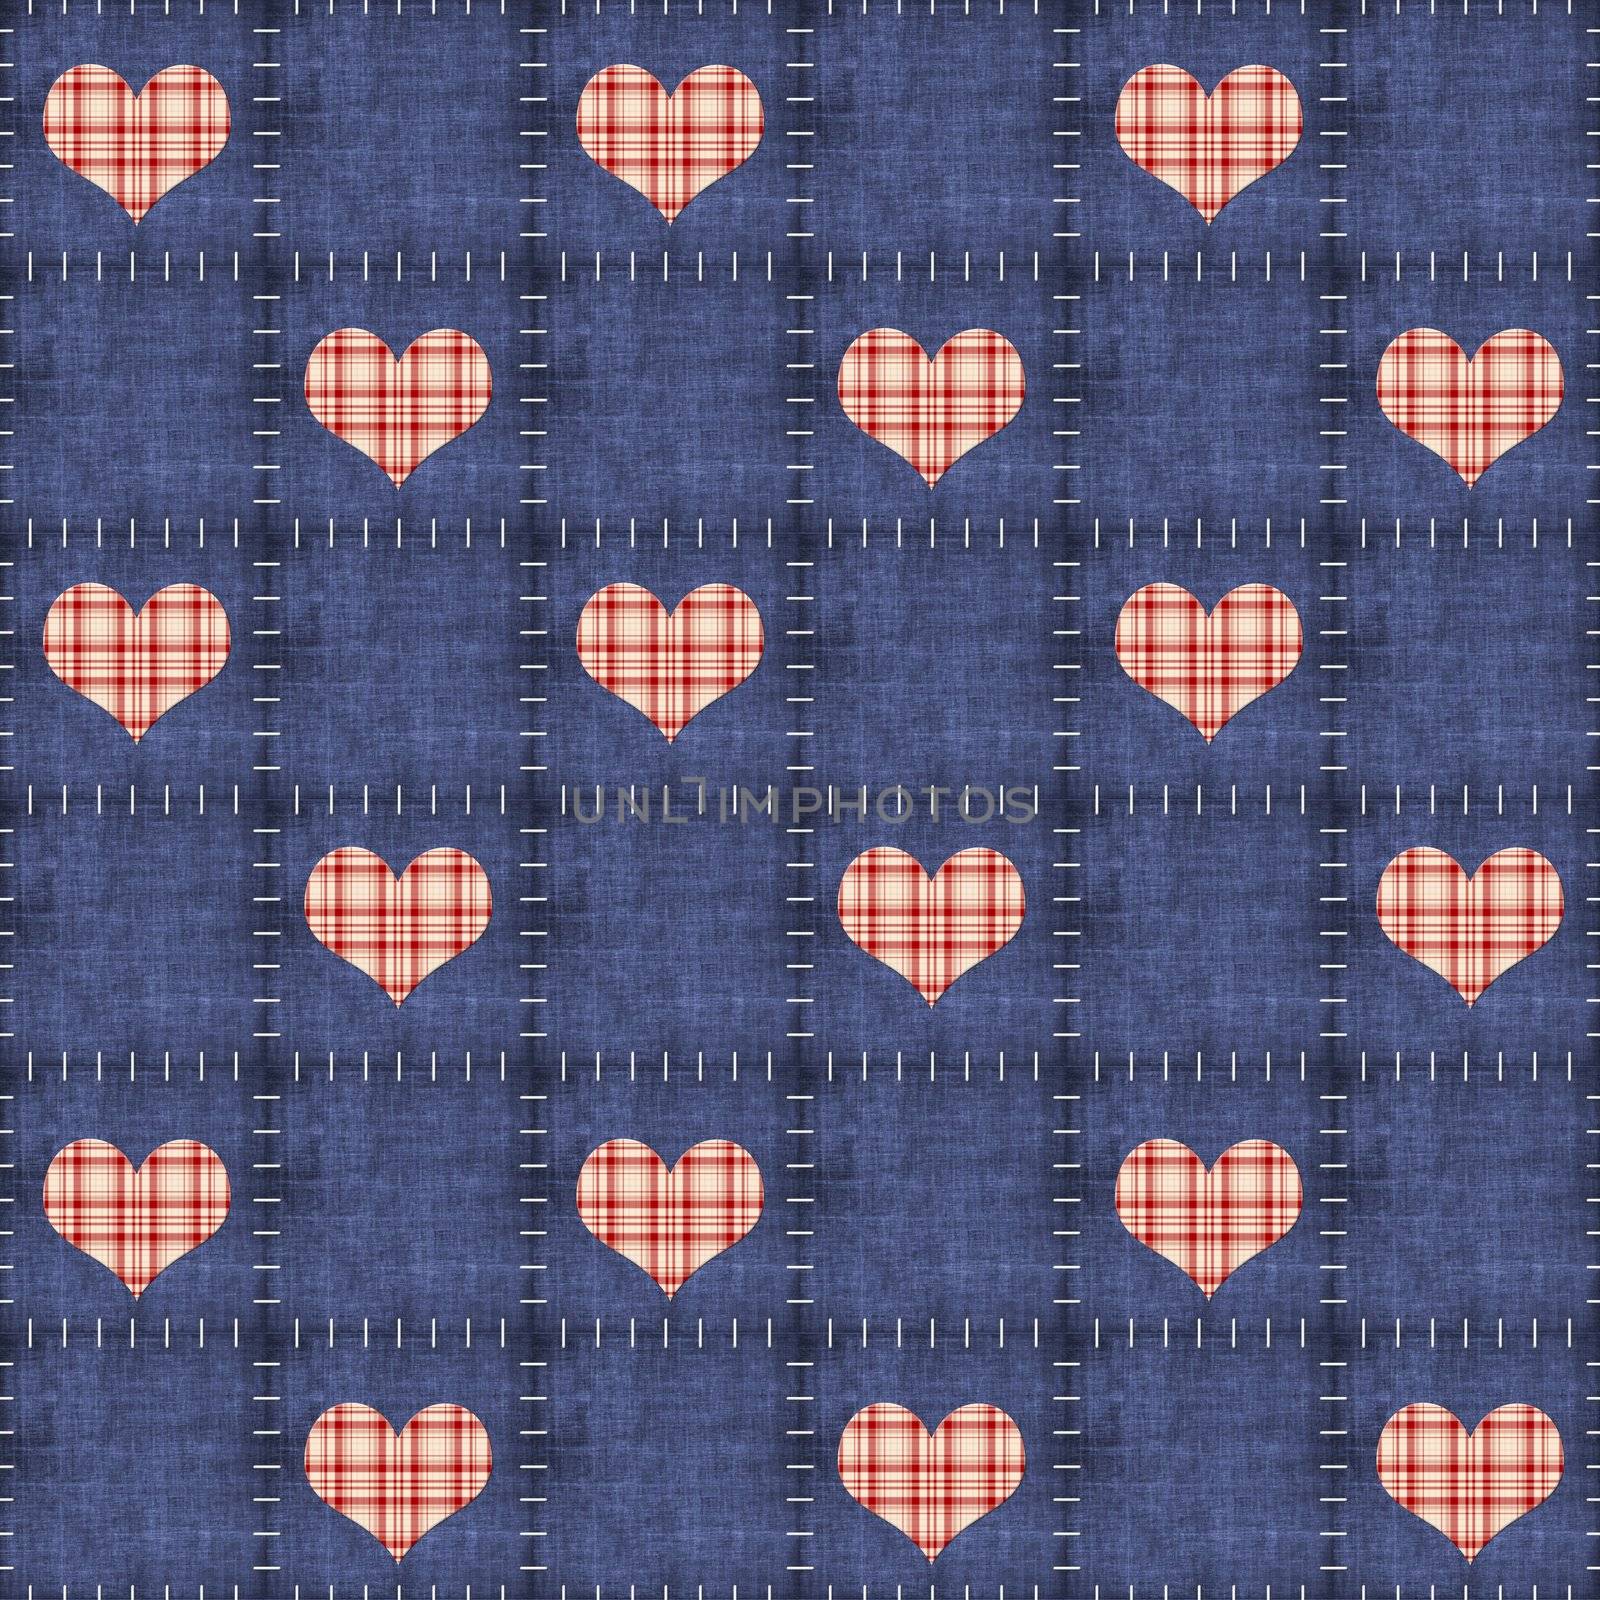 Patched denim with red plaid hearts tile seamlessly